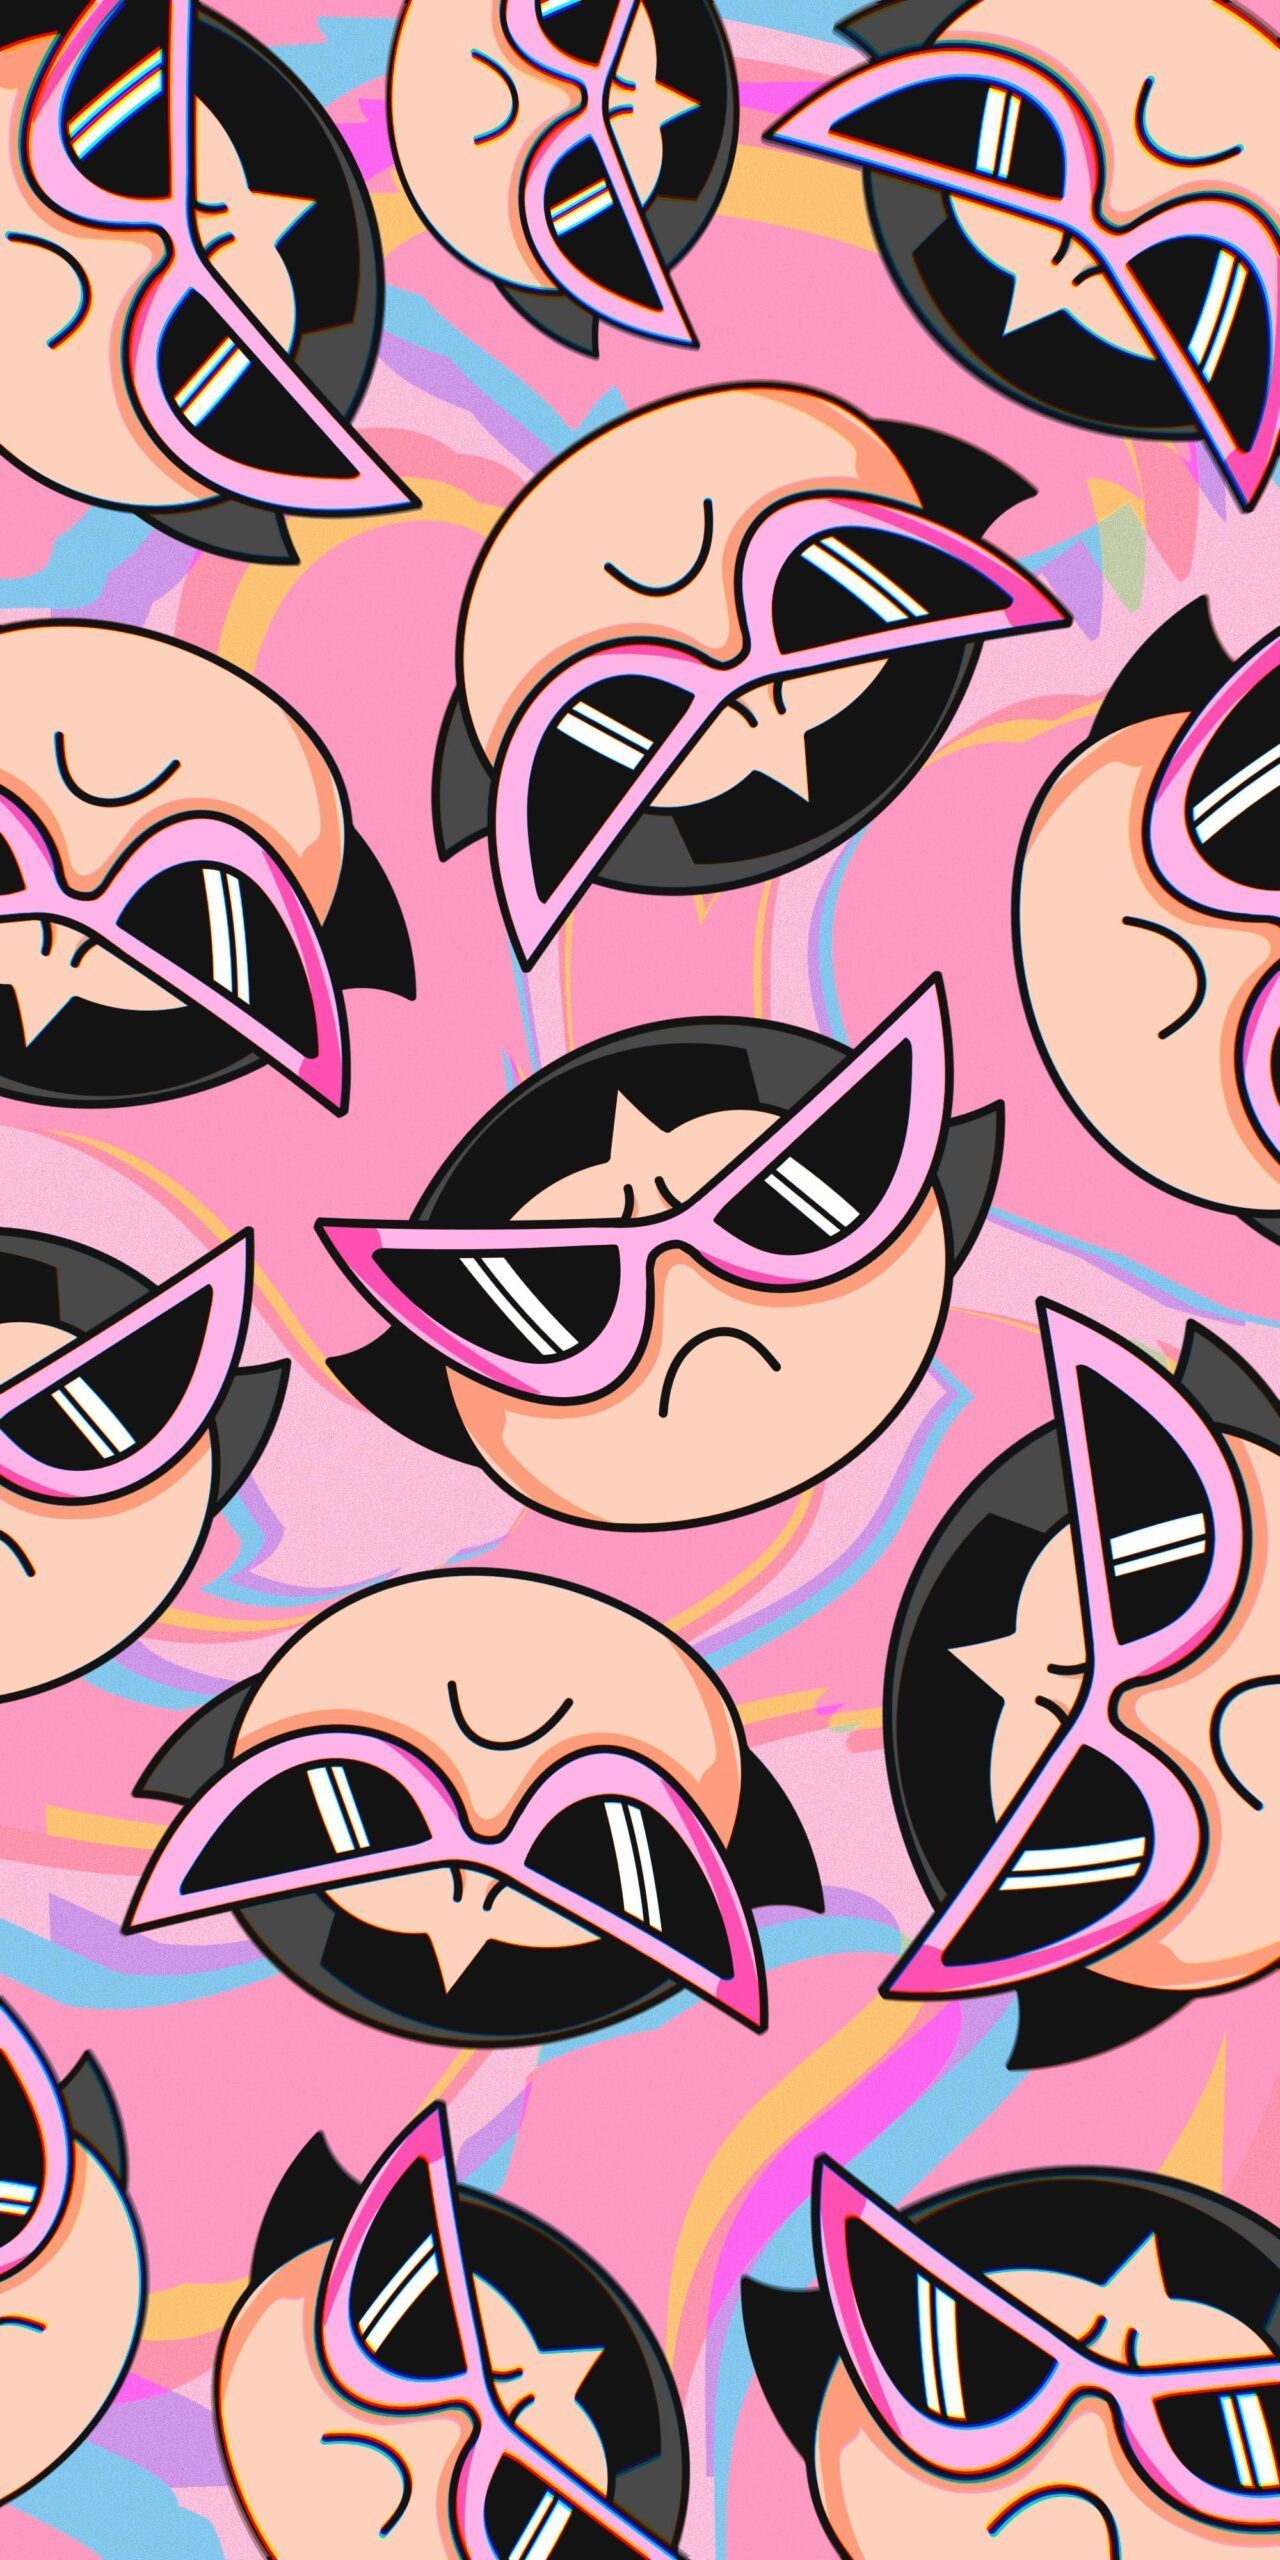 Wallpaper of cartoonish lips with sunglasses on a pink background - The Powerpuff Girls, Buttercup